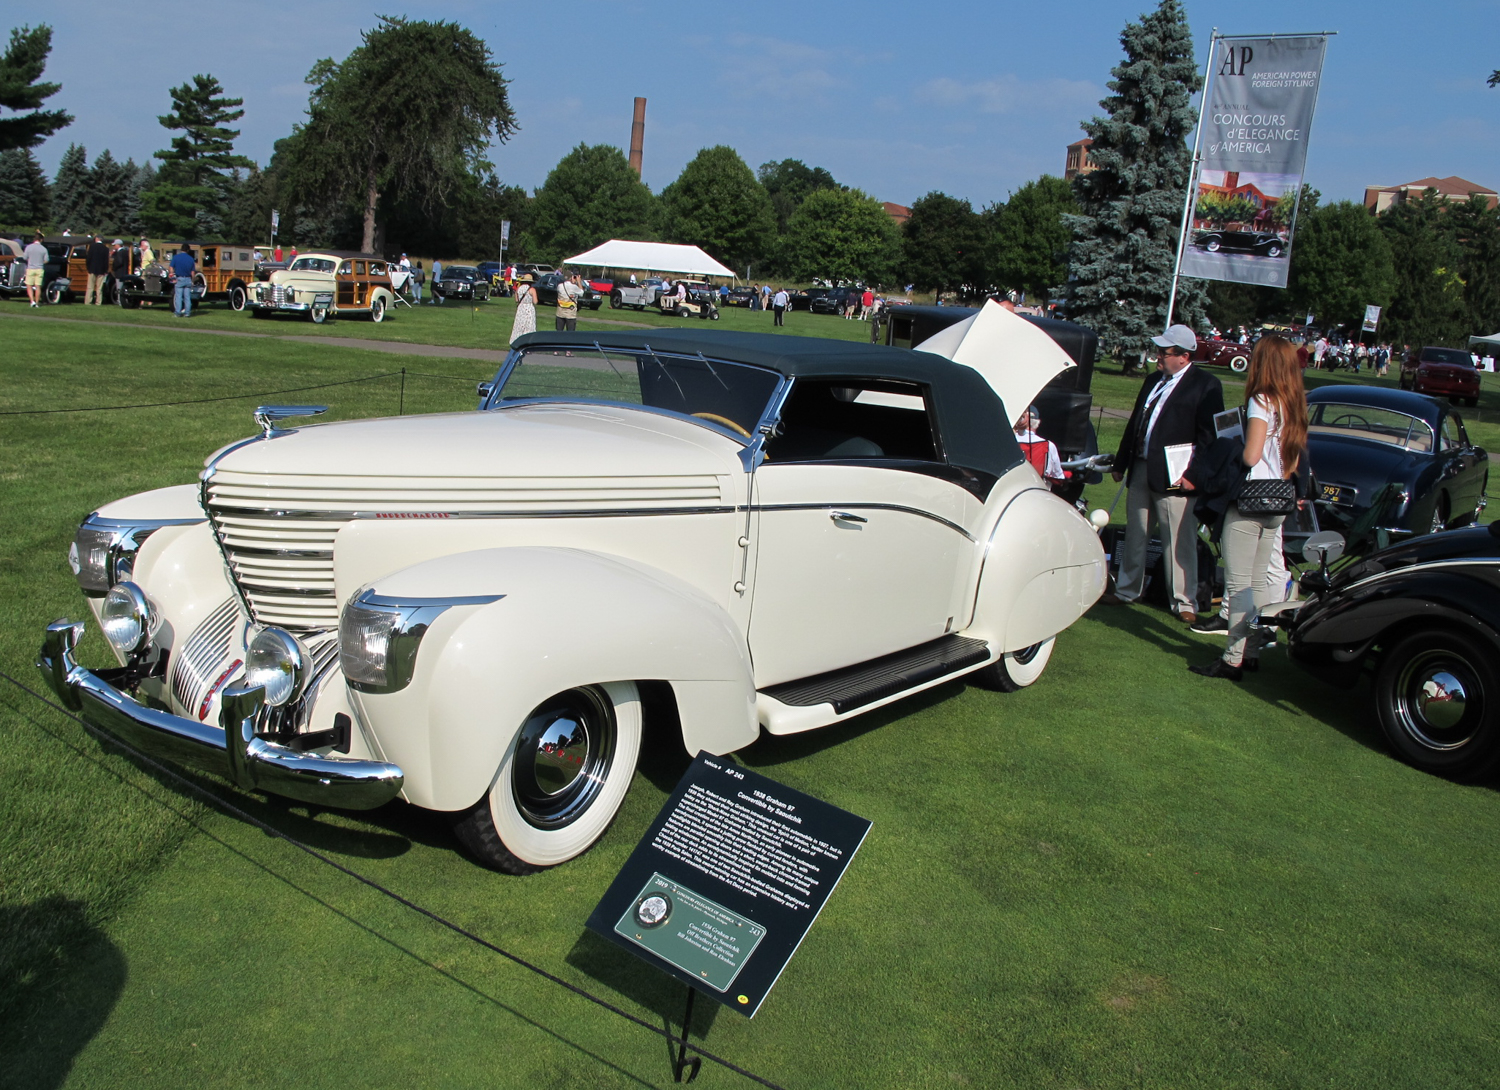 1938 Graham 97 Convertible by Saouchik owned by Bill Johnston and Ron Elenbaas.